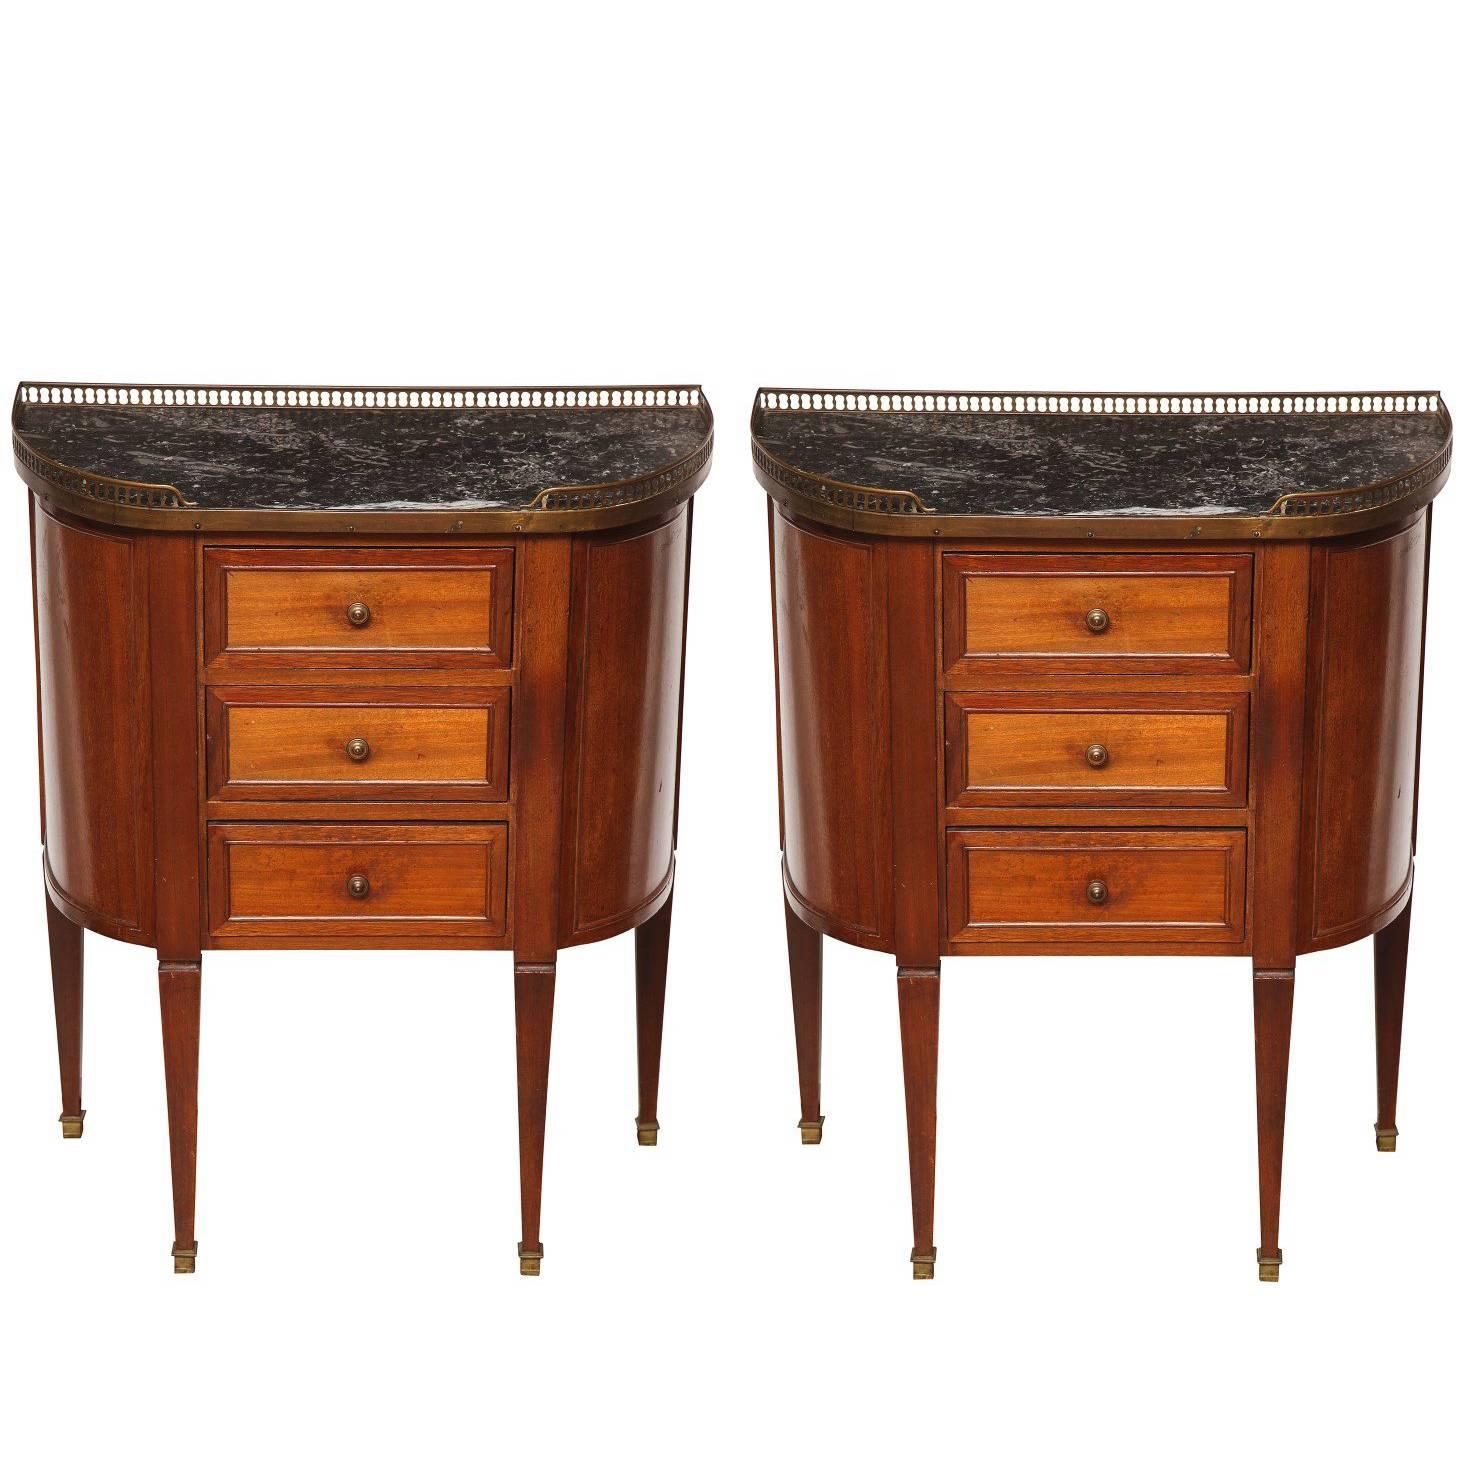 Pair of Sheraton Style Bed Side Tables